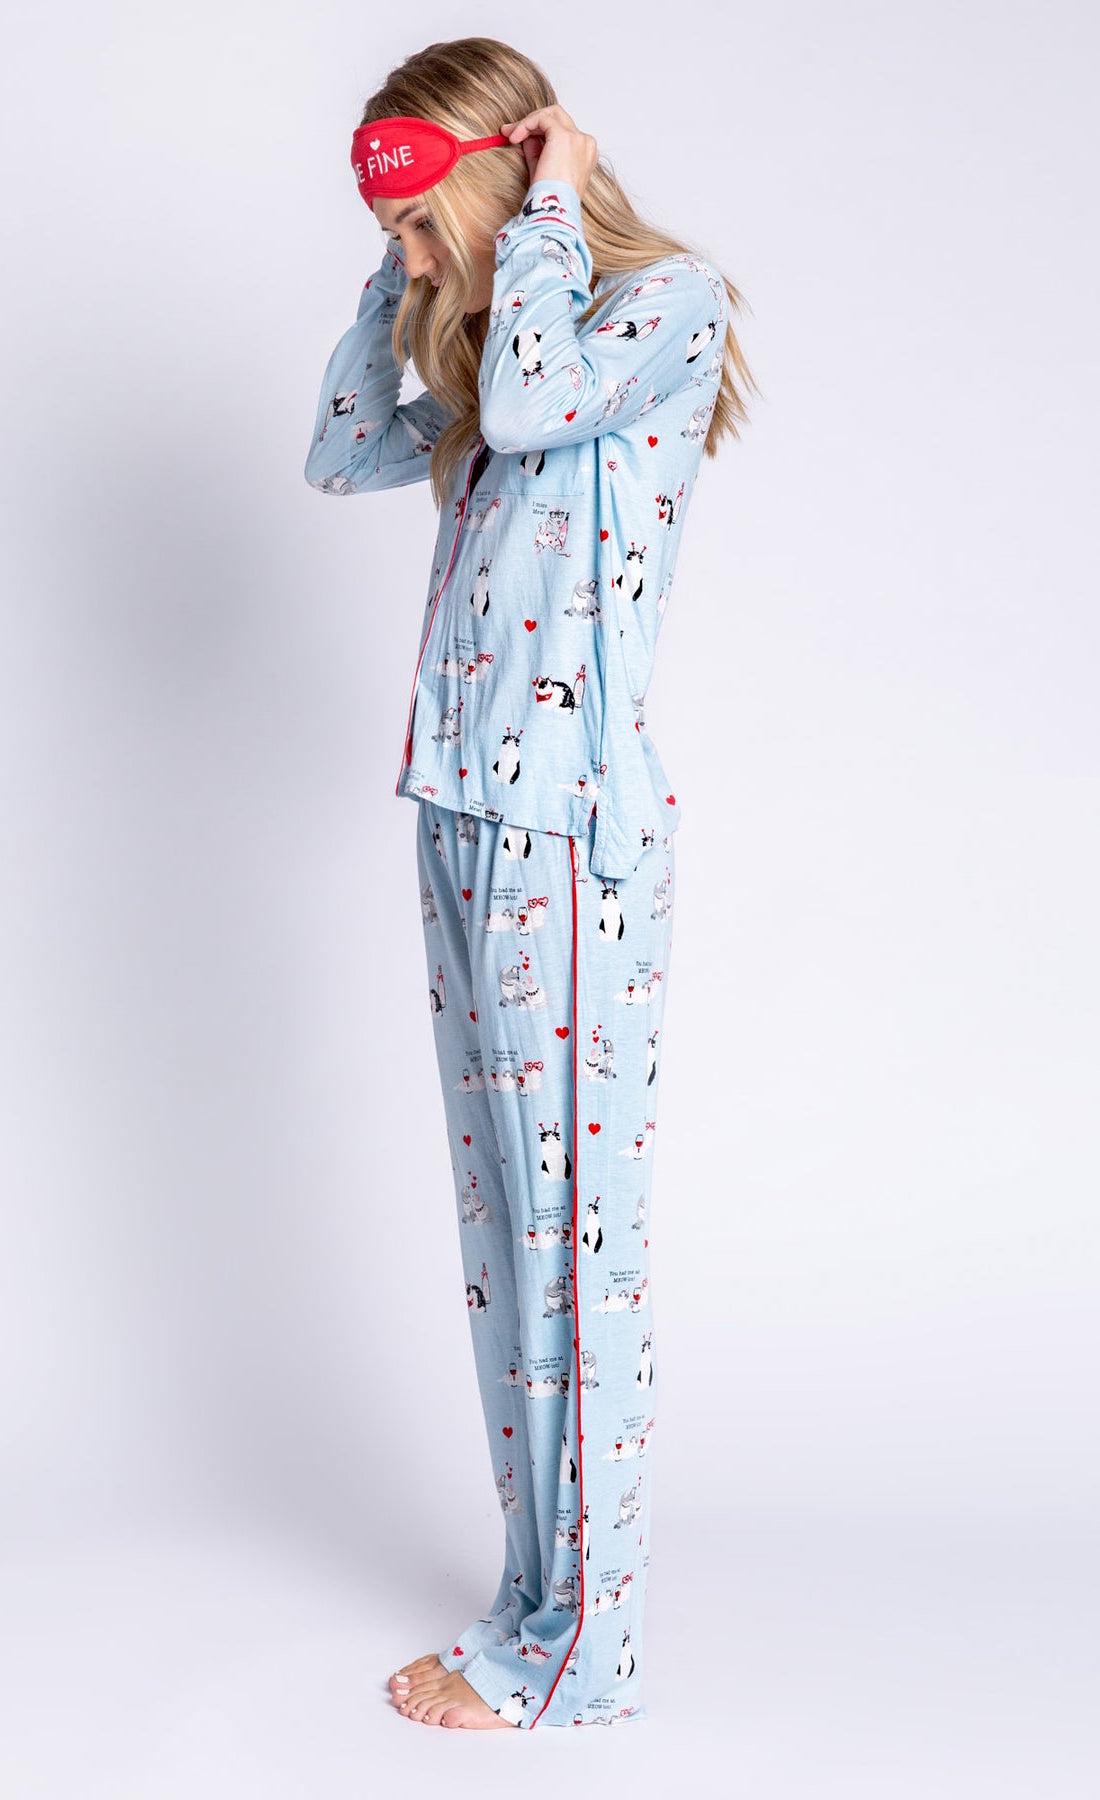 Left side full body view of woman wearing the pj salvage love is a four legged word pj set. This set is light blue colored with cats printed all over it and red trim. The set has a button down shirt with long sleeves, relaxed pants, and a red sleep mask that says feline fine.